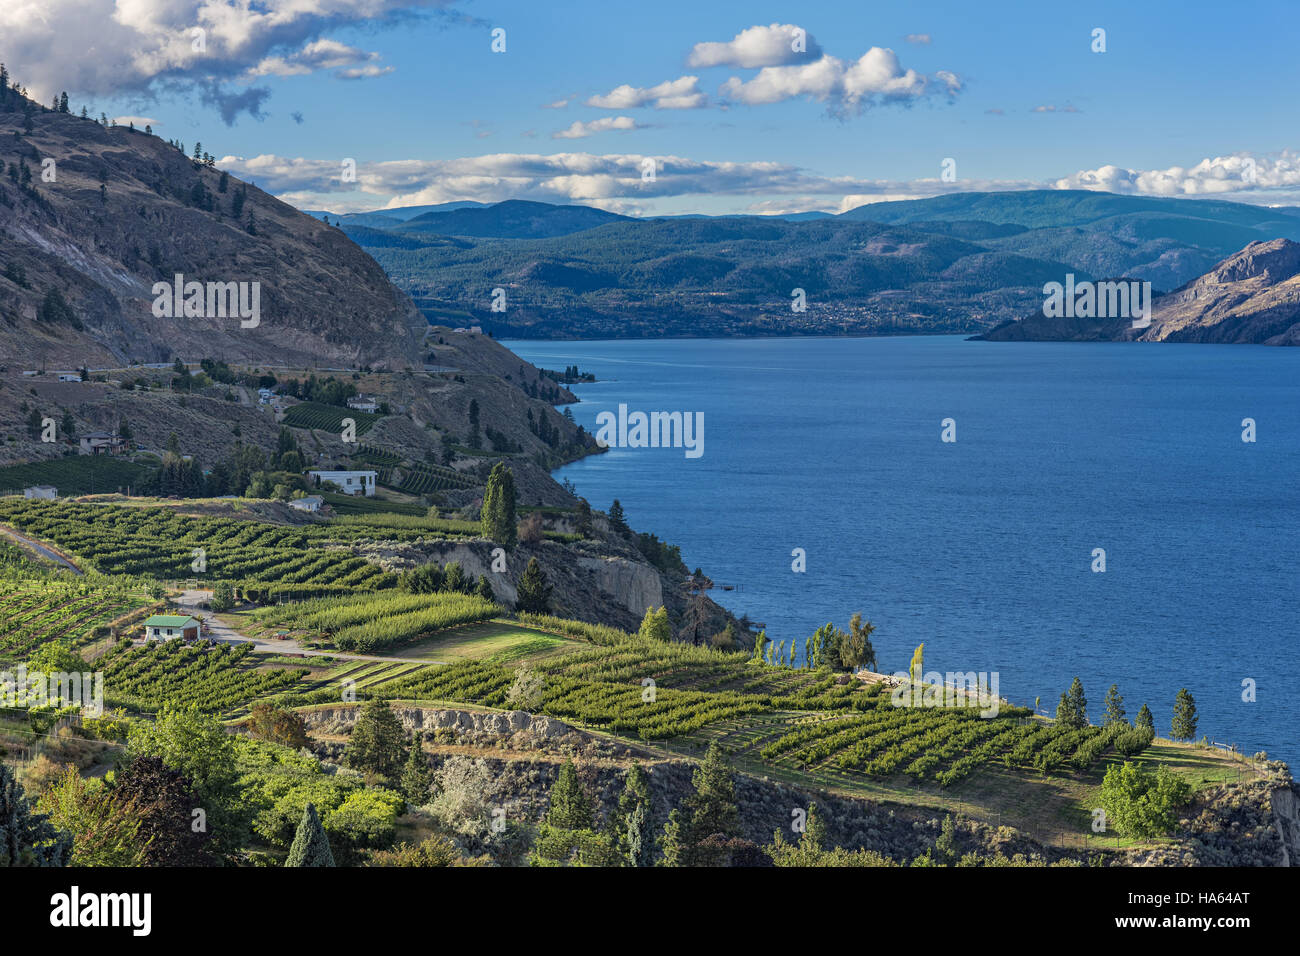 Okanagan Lake near Summerland British Columbia Canada with orchard and vineyard in the Foreground Stock Photo